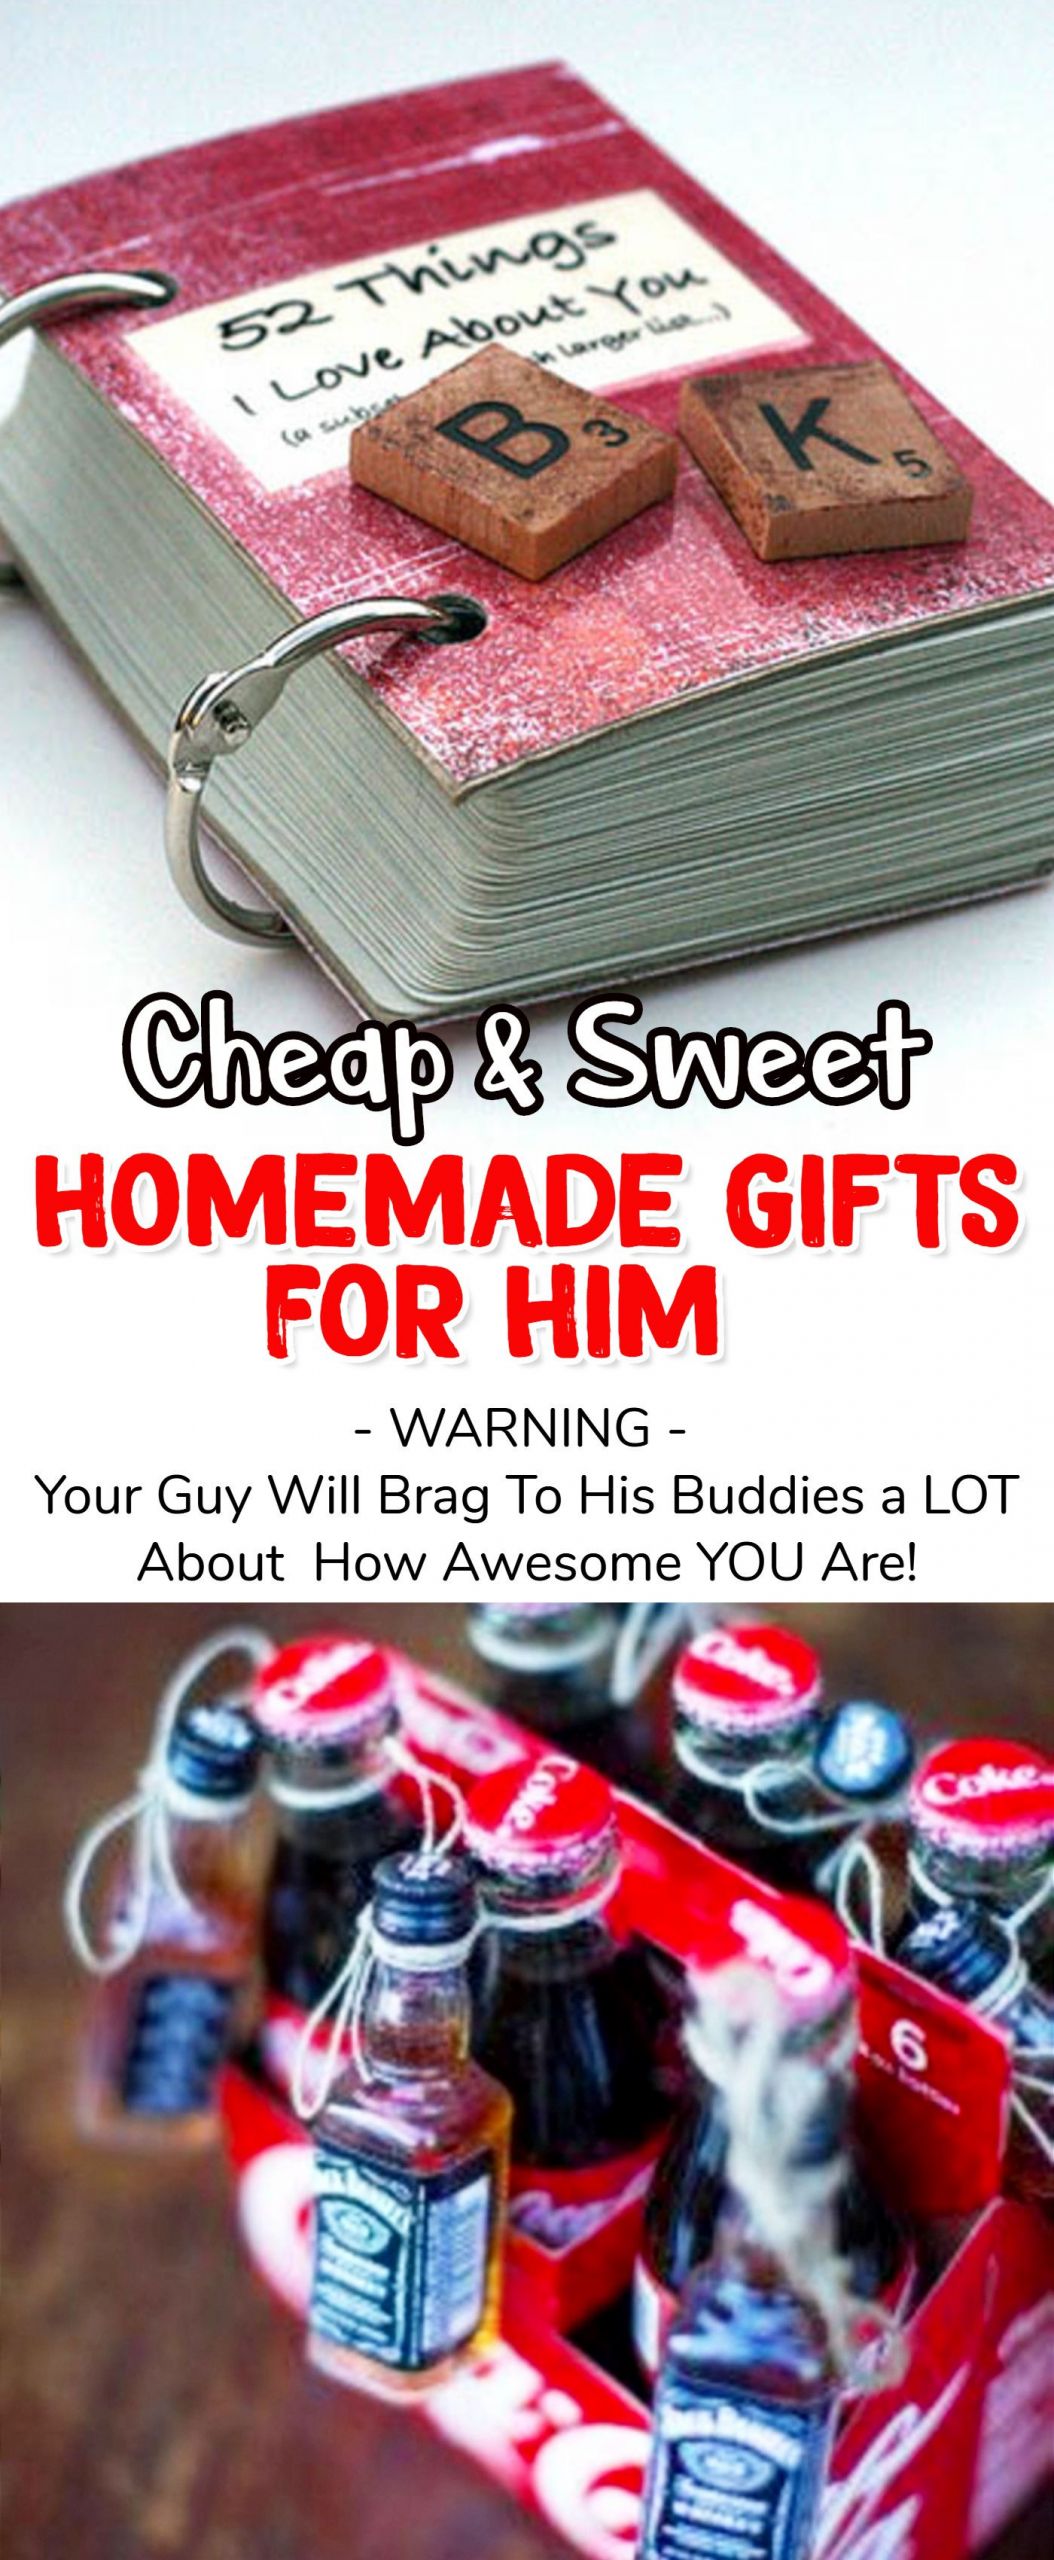 Valentines Gift Ideas For Boyfriend Yahoo
 Homemade Gift Ideas For Him 26 Romantic DIY Gifts To